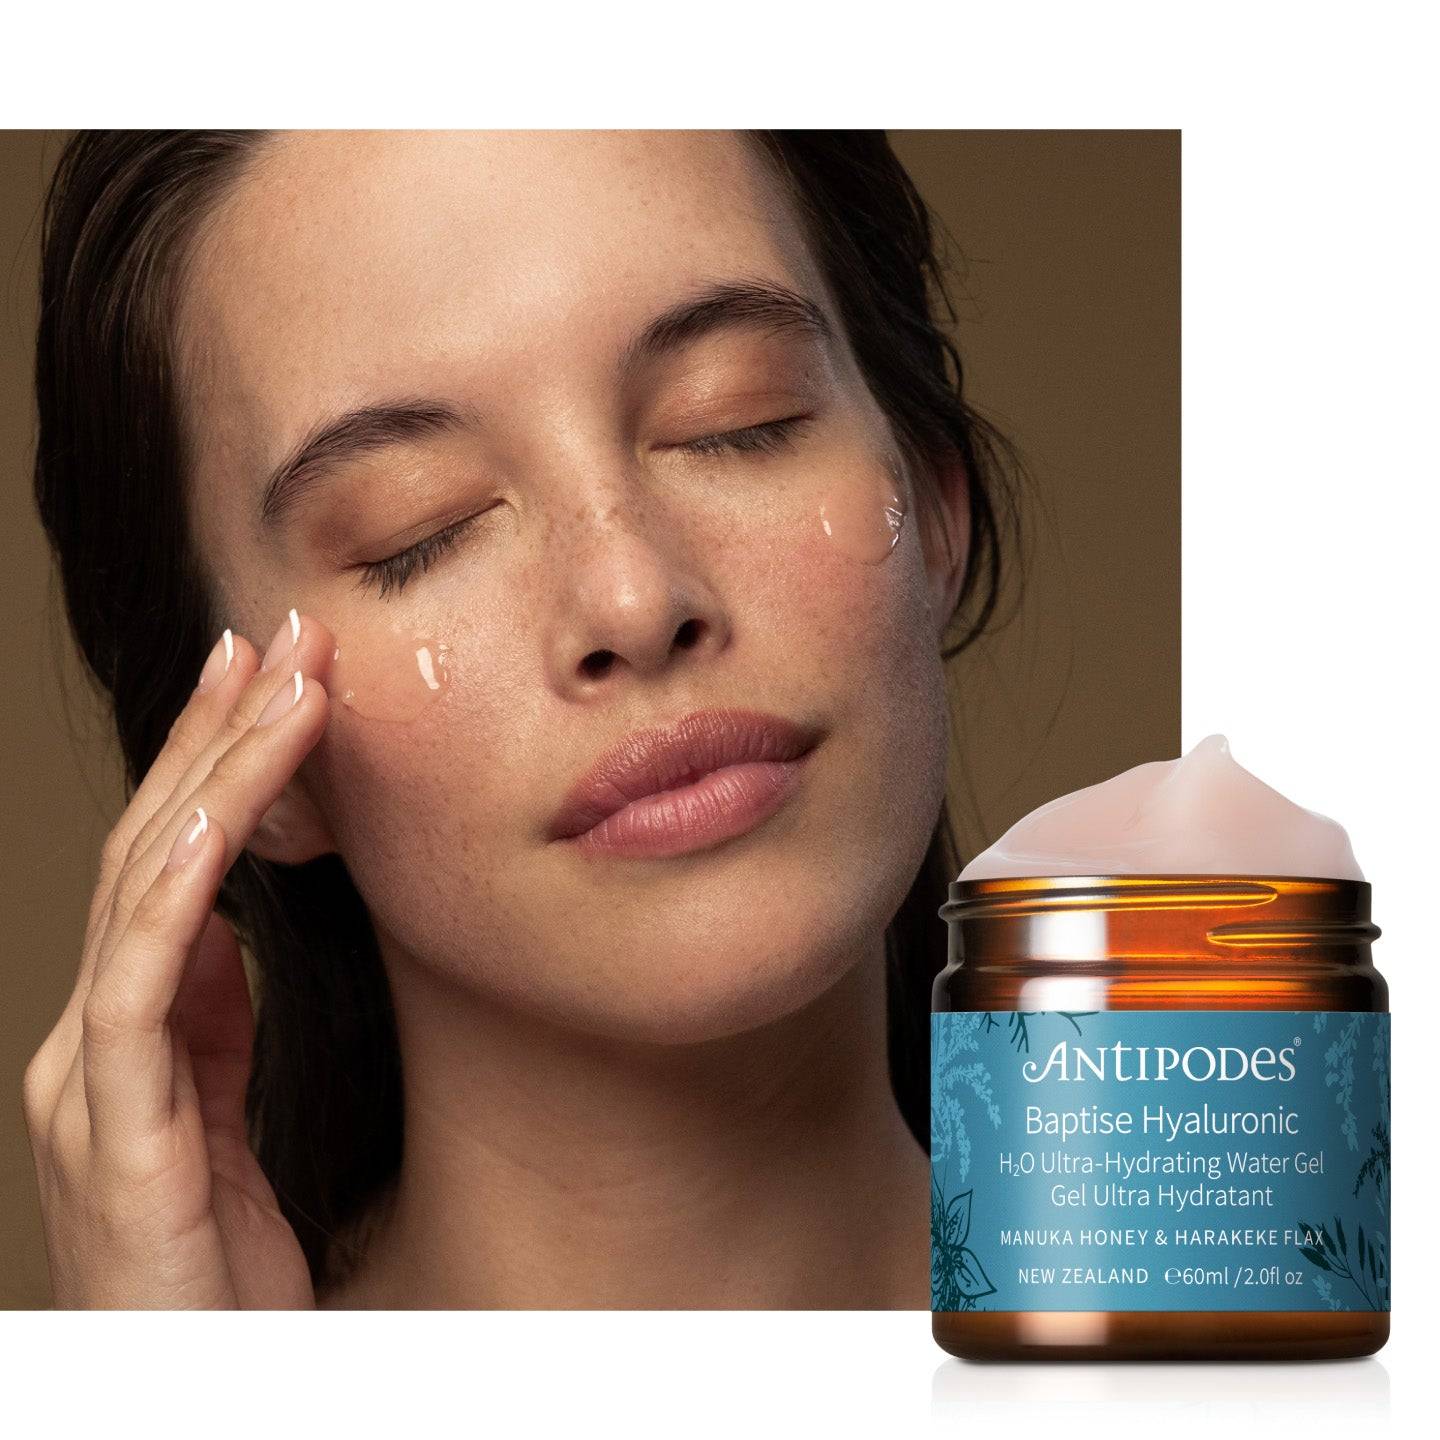 Baptise Hyaluronic is Clinically shown to hydrate skin by up to 52% after 24 hours.